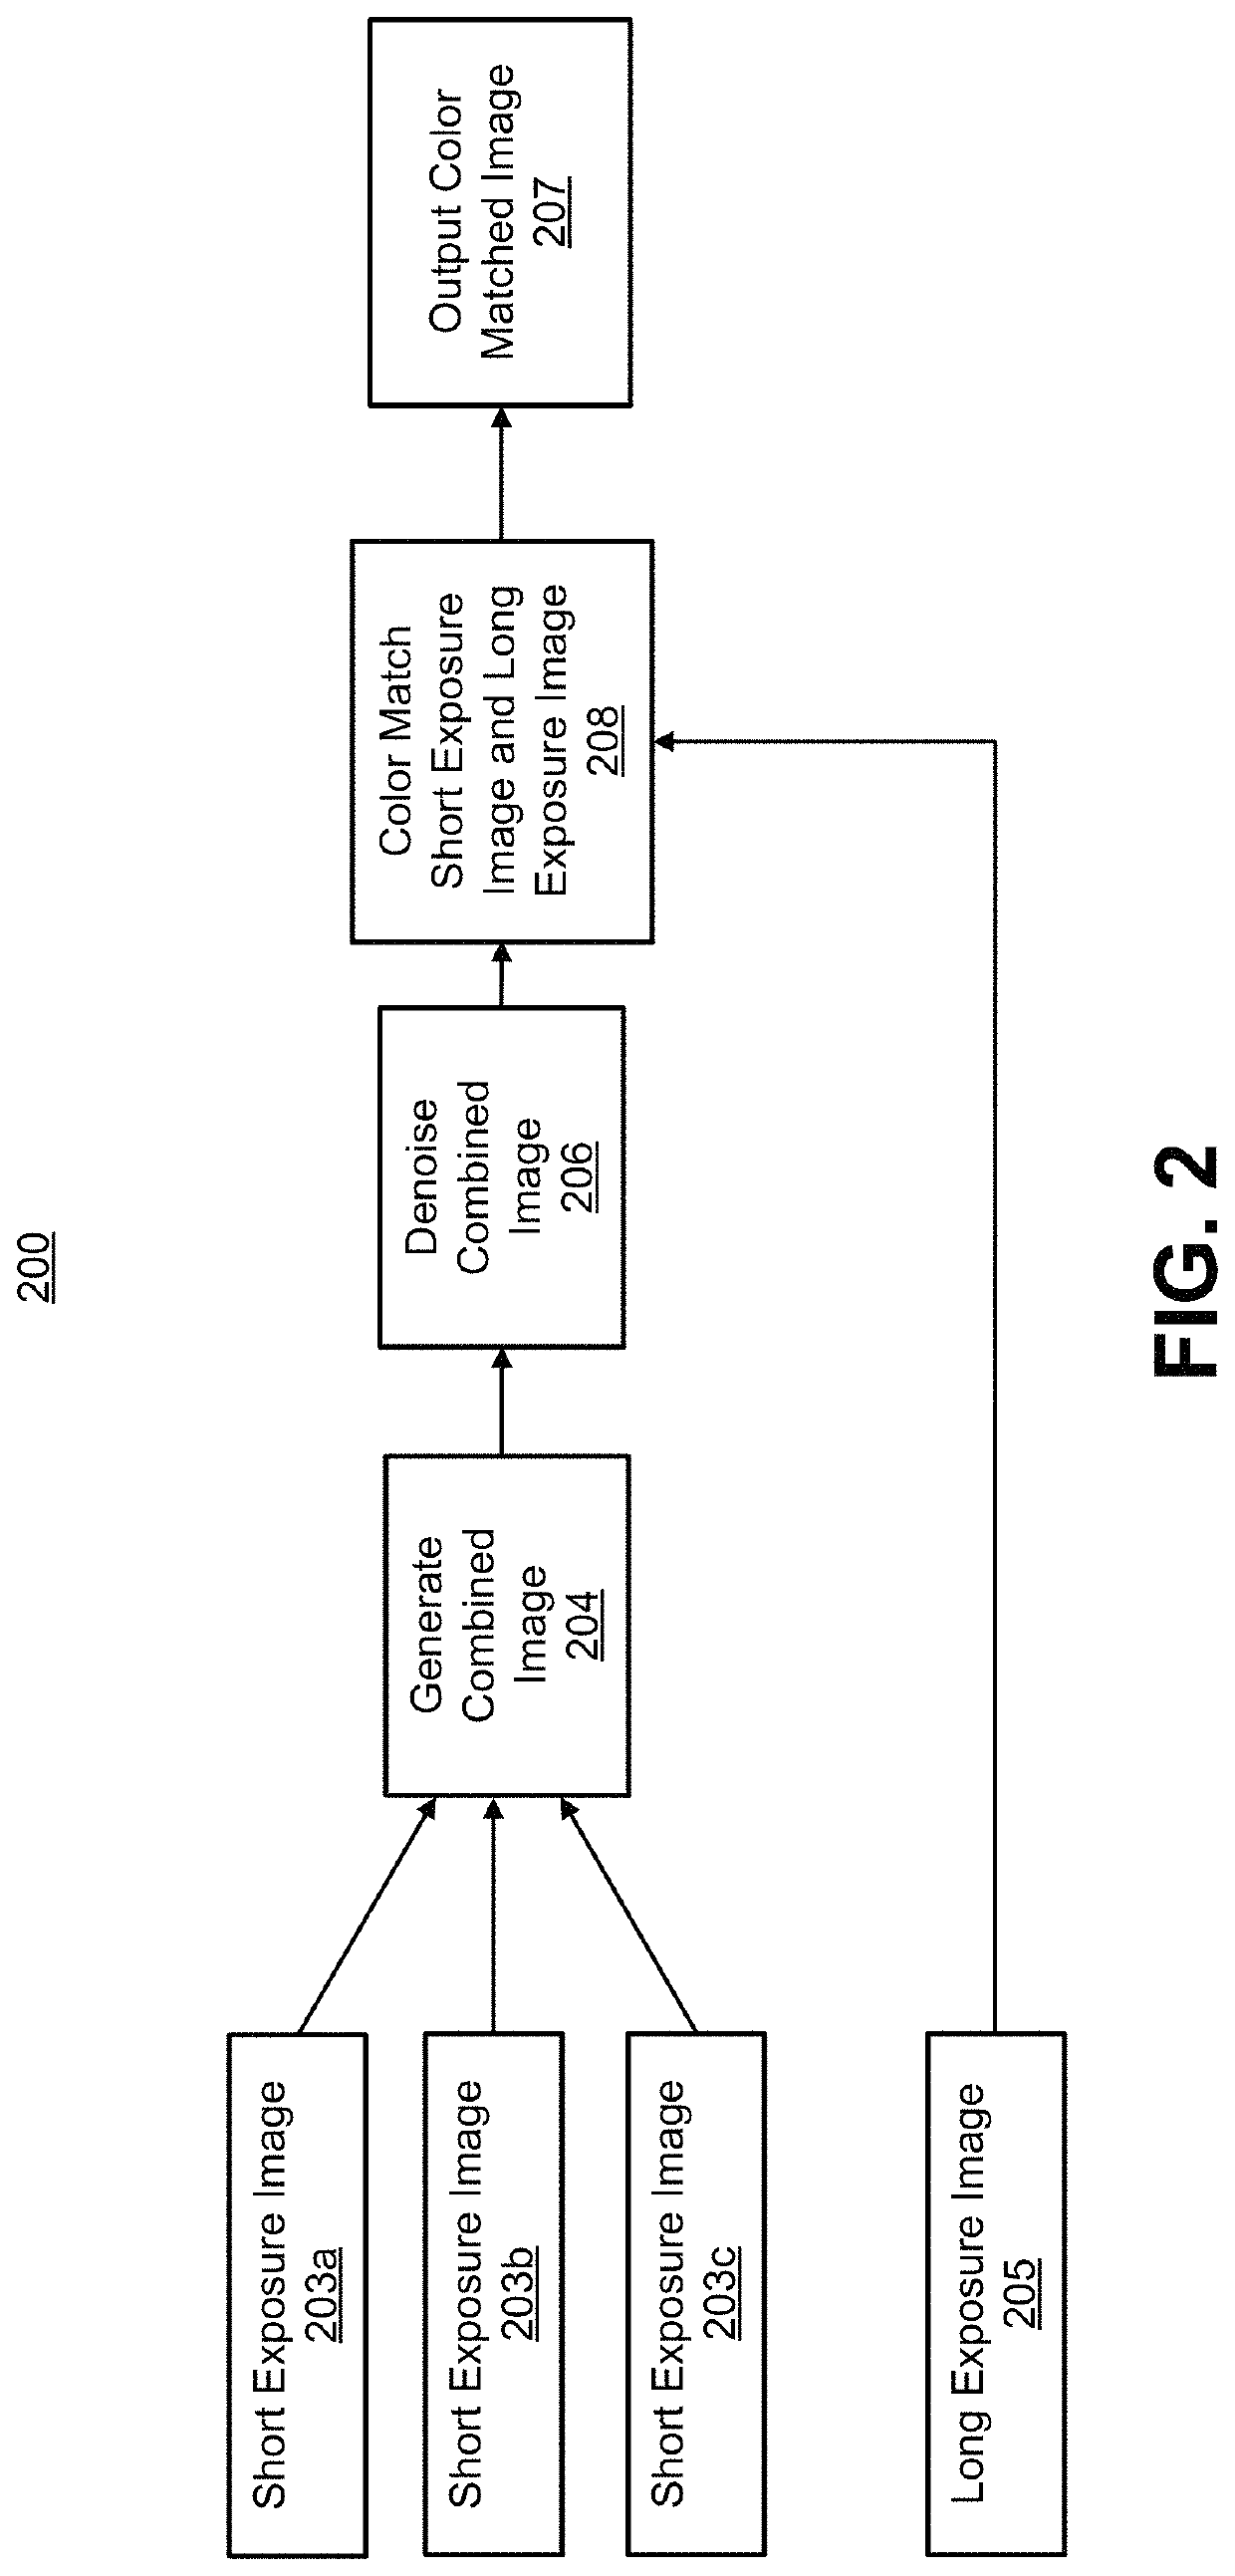 Systems and methods for processing low light images